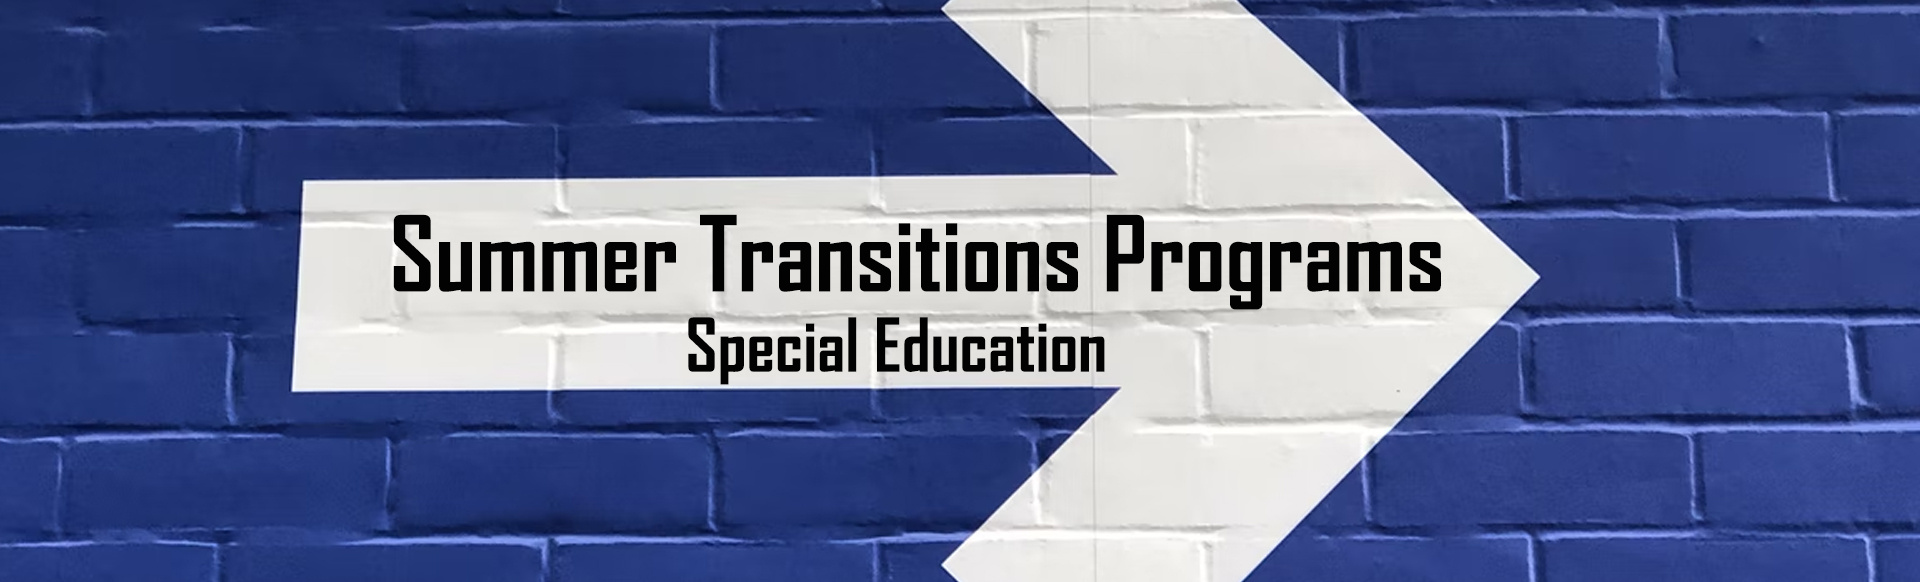 Summer Transitions Programs for Special Education